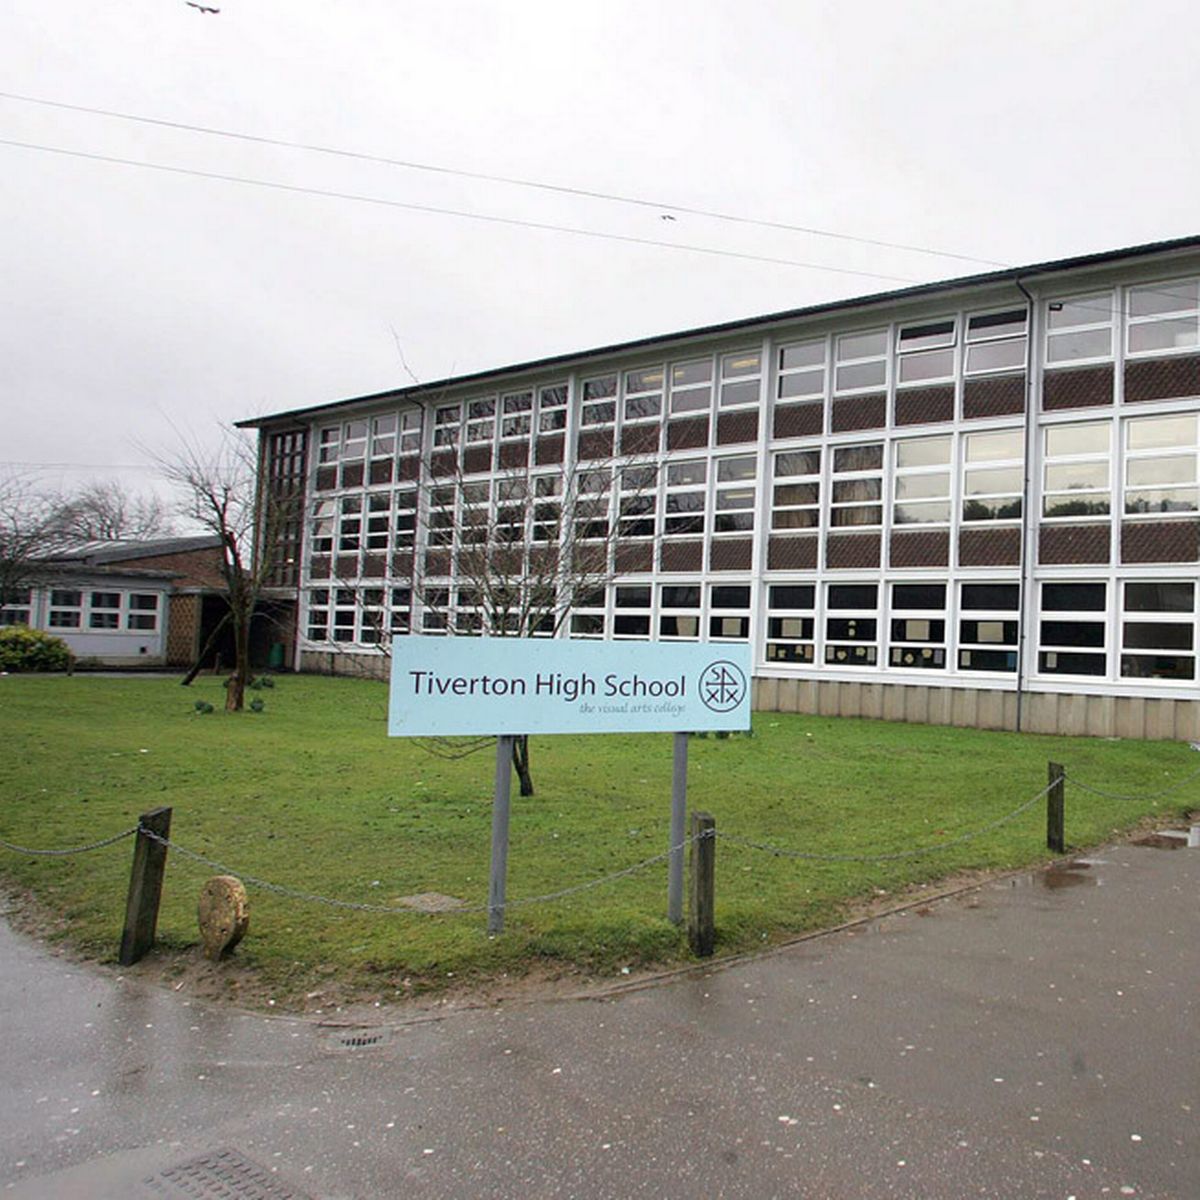 Despite reports in the press stating that the bid to rebuild Tiverton High School was dead, it is alive and progressing towards a decision later in the year. tivertonhonitonconservatives.co.uk/news/tiverton-…